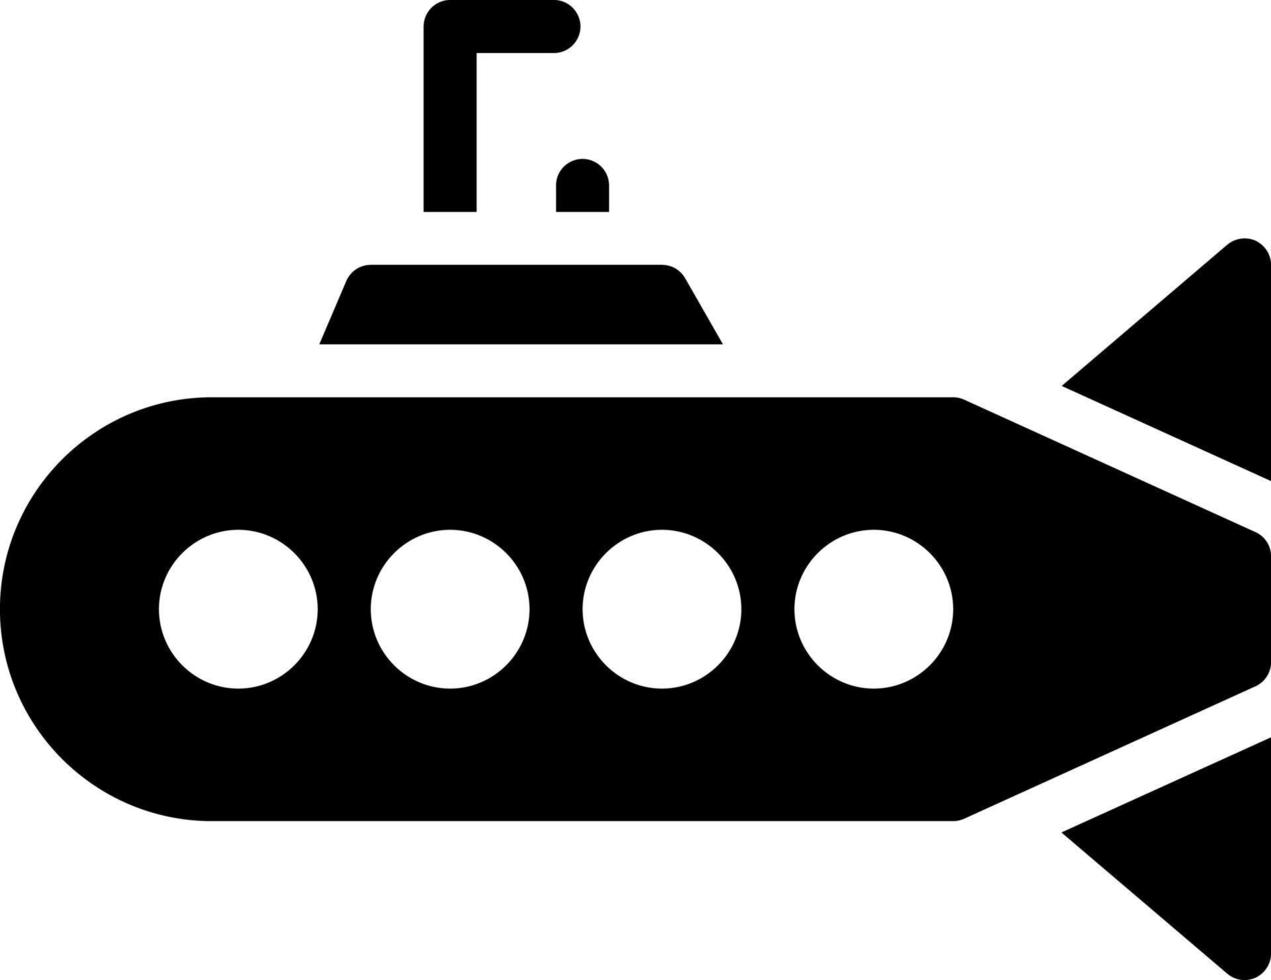 submarine vector illustration on a background.Premium quality symbols.vector icons for concept and graphic design.